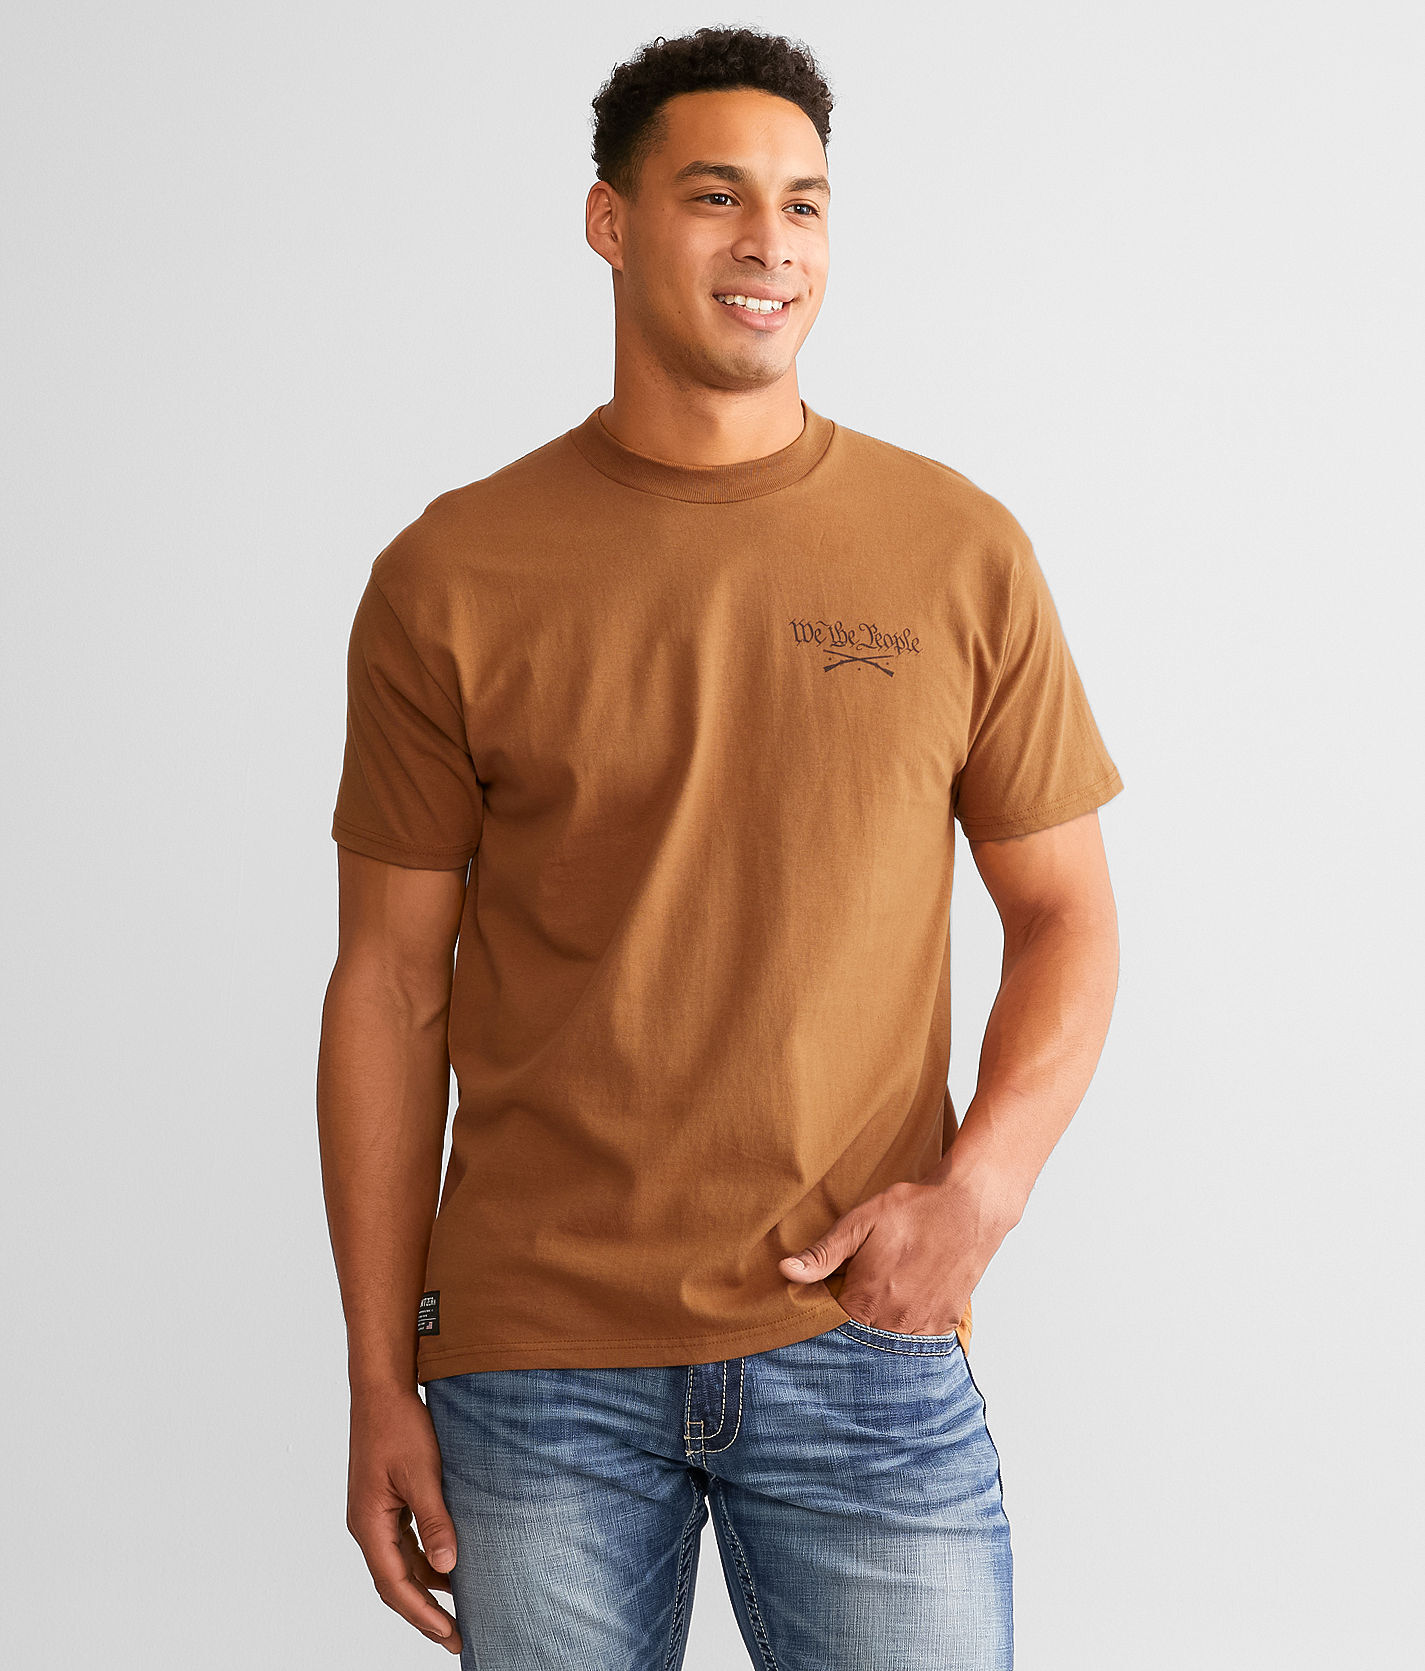 Howitzer We The People T-Shirt  - Brown - male - Size: Small